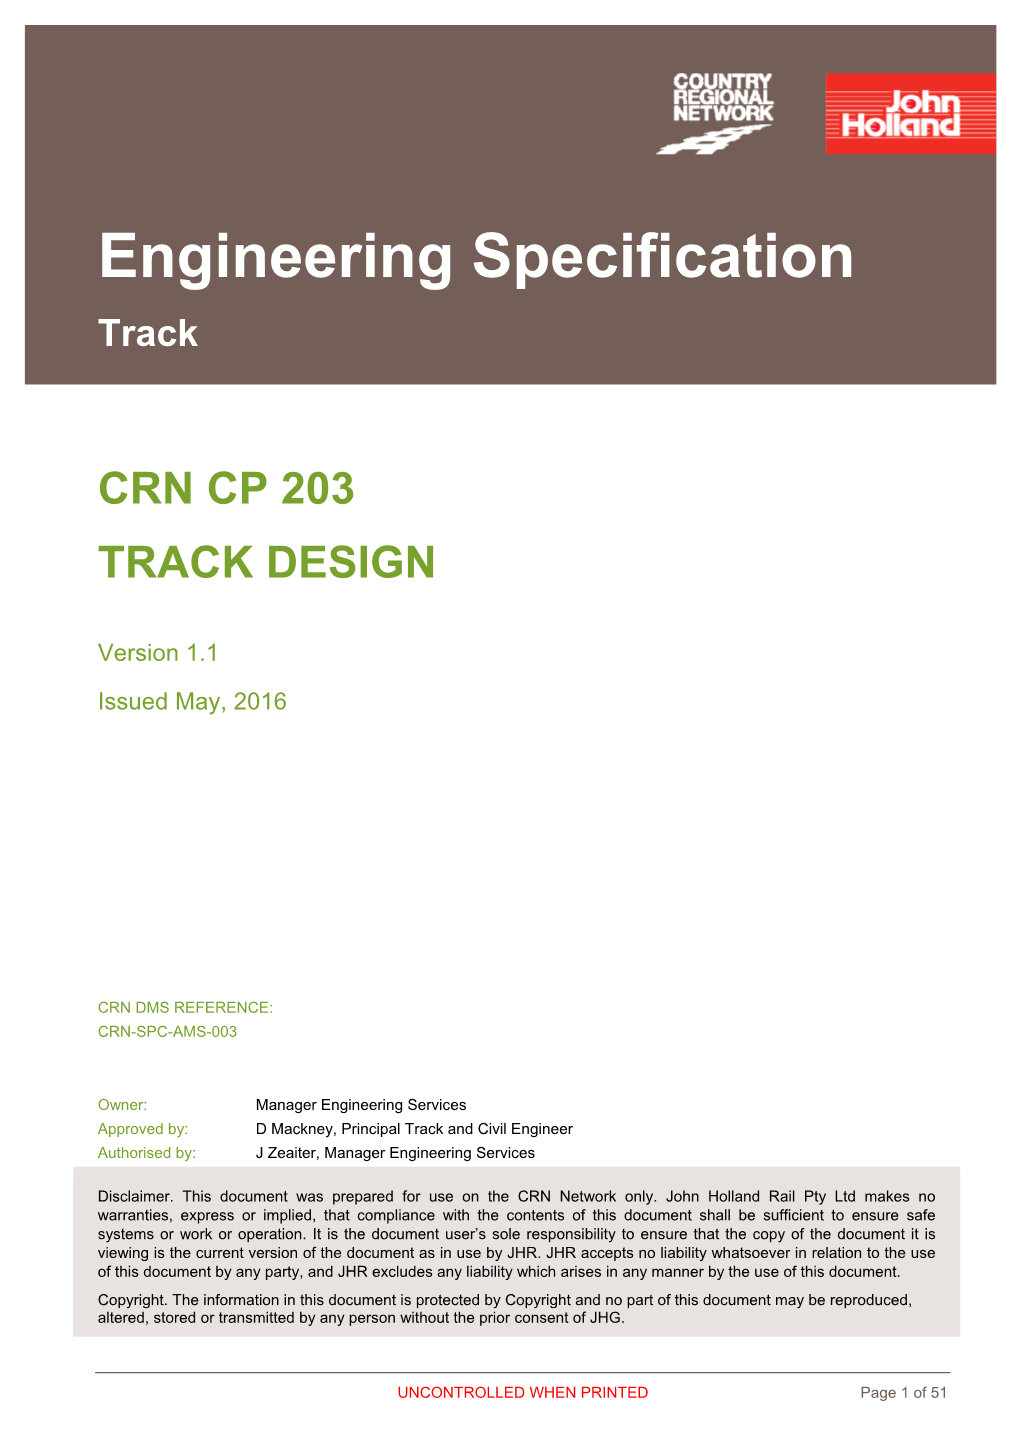 Engineering Specification Track